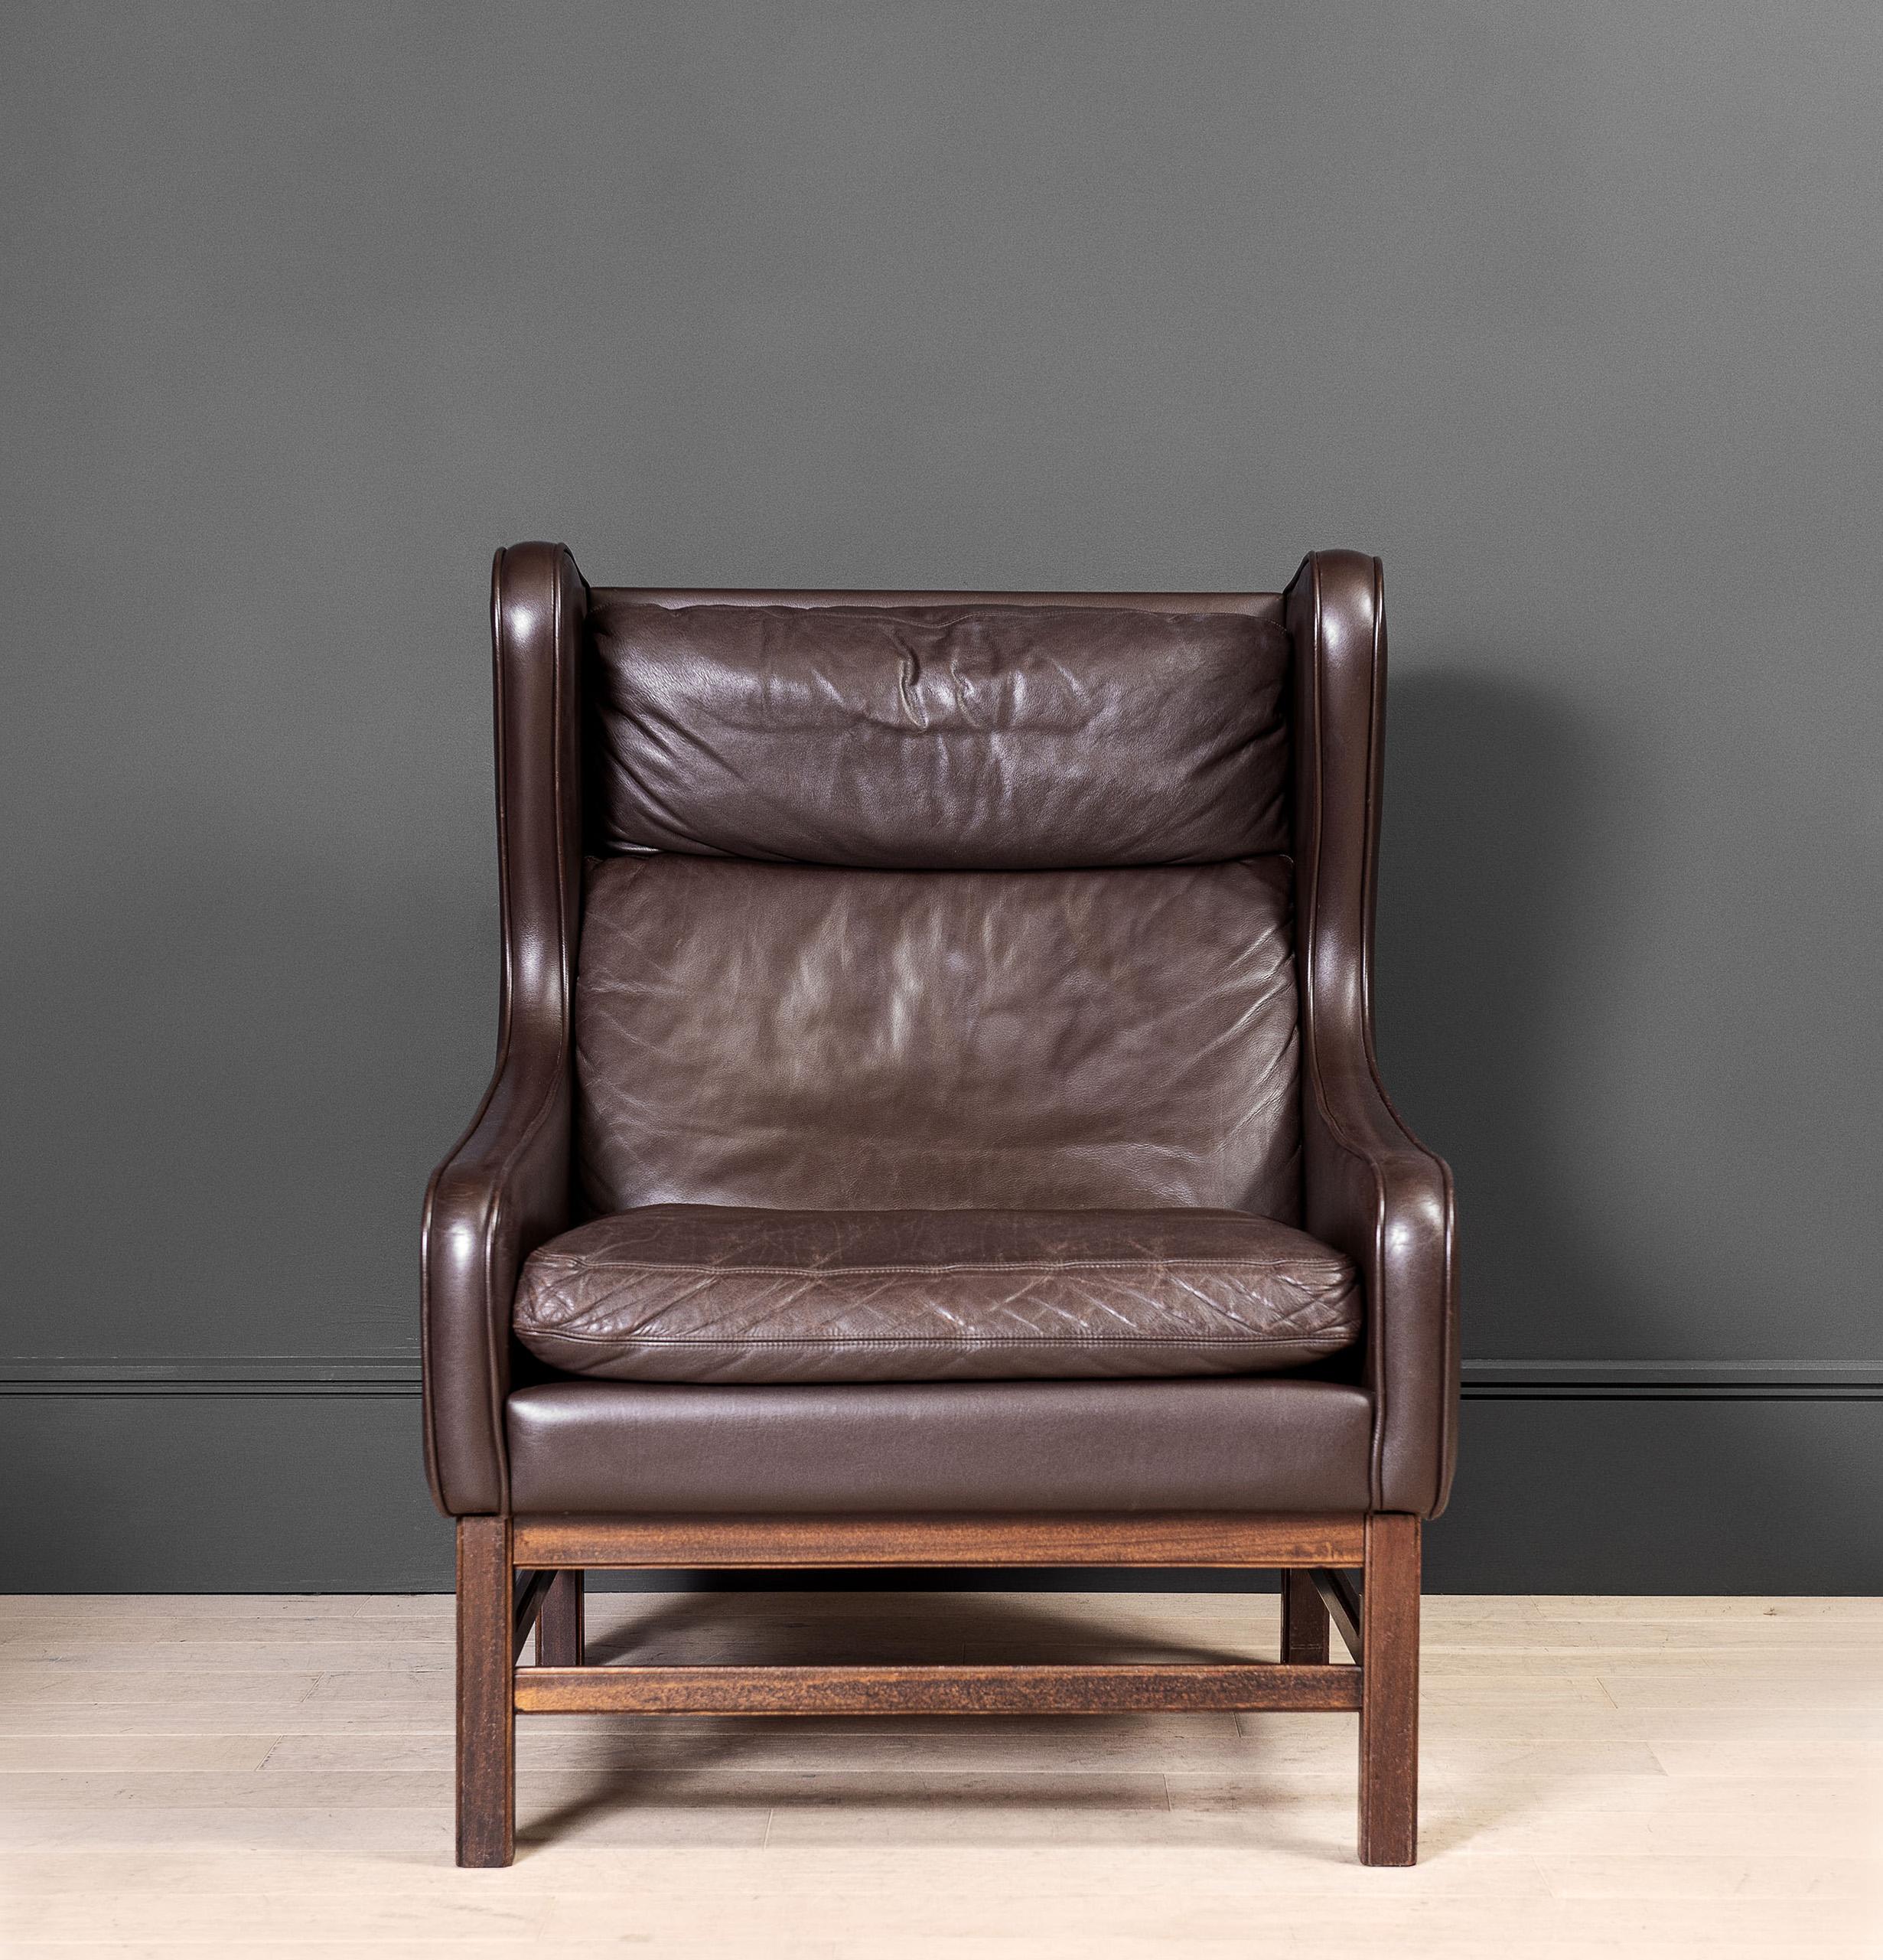 Sofa is available to purchase separately if preferred. 
A matching 3 seater dark brown leather wing-back sofa and lounge chair. Produced in Denmark during the 1960s. Borge Mogensen in style - these are substantial pieces and rather unusual in their